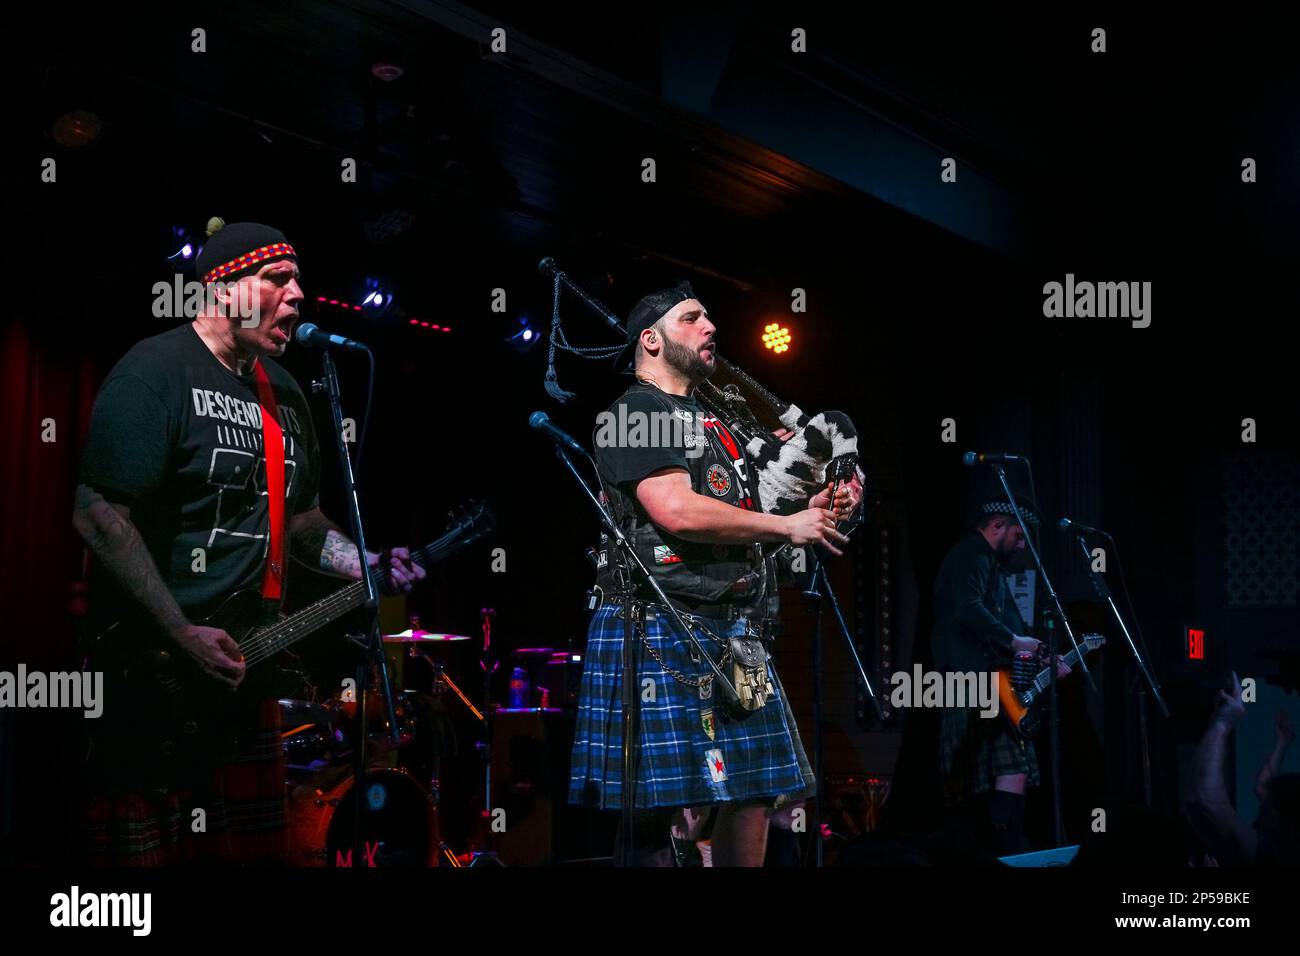 THE REAL McKENZIES! Celtic Rock or punk band? – Rock At Night